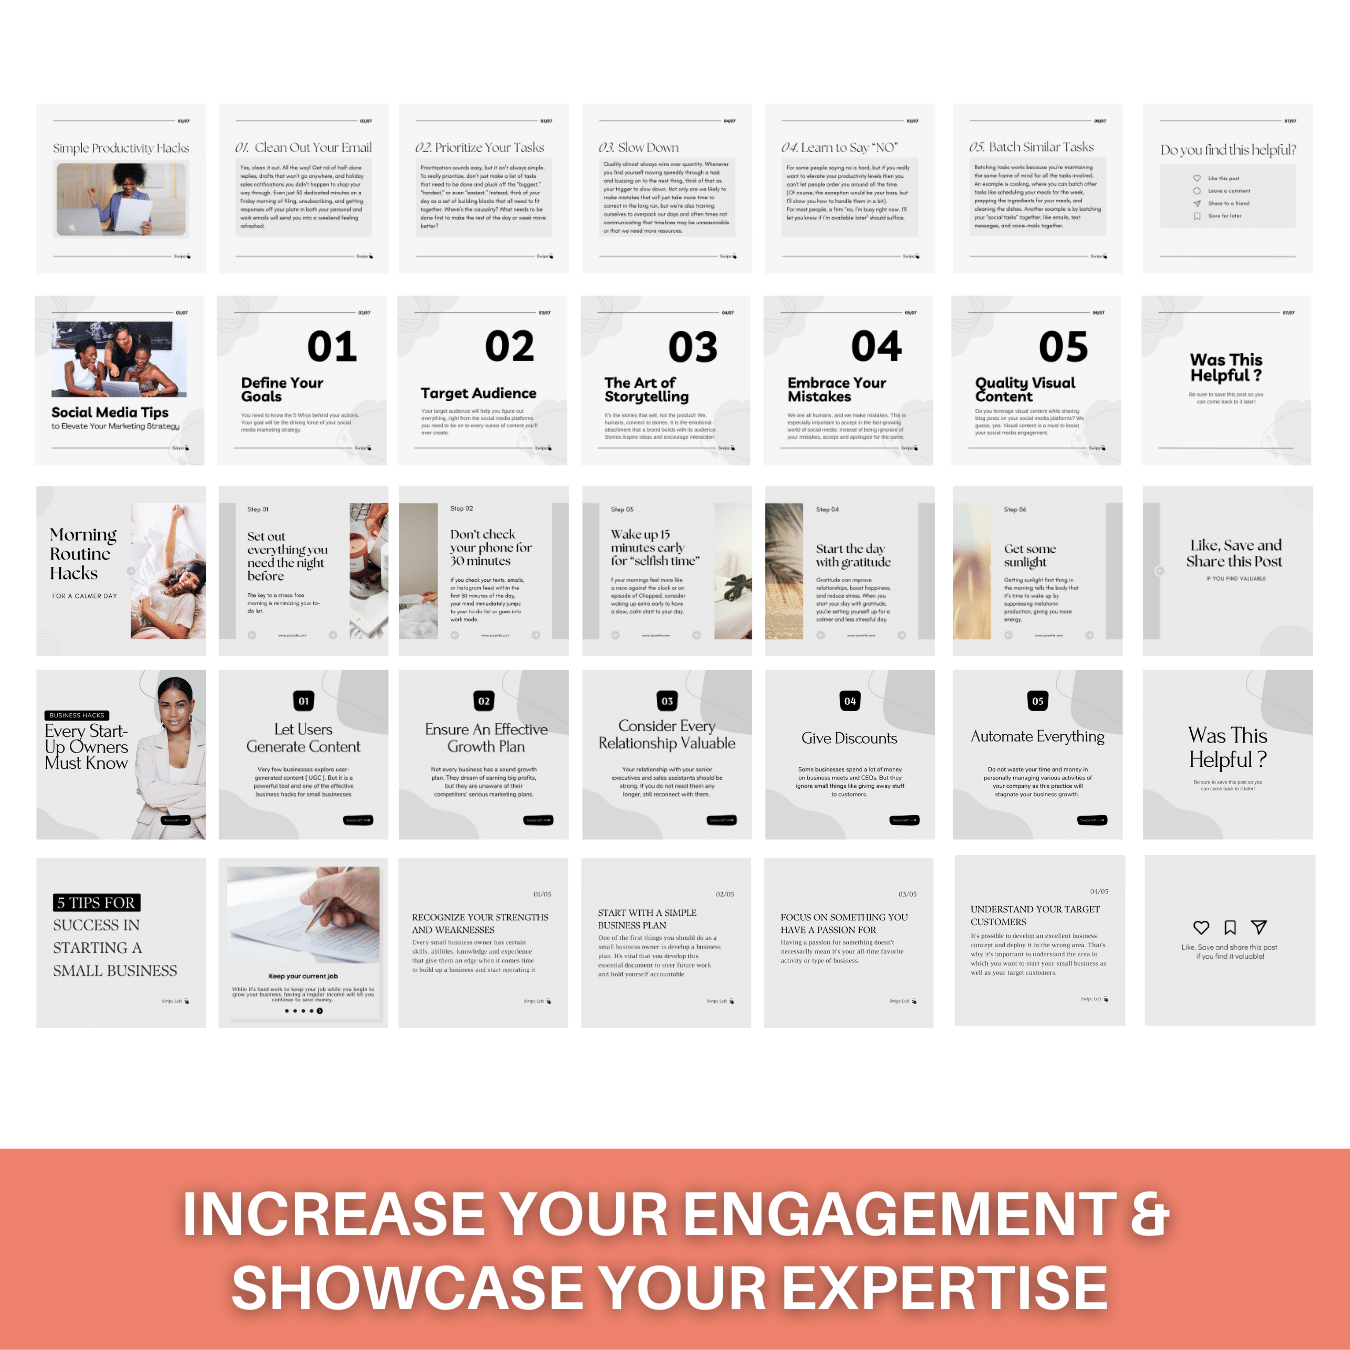 Carousel Template For Instagram To increase Instagram growth